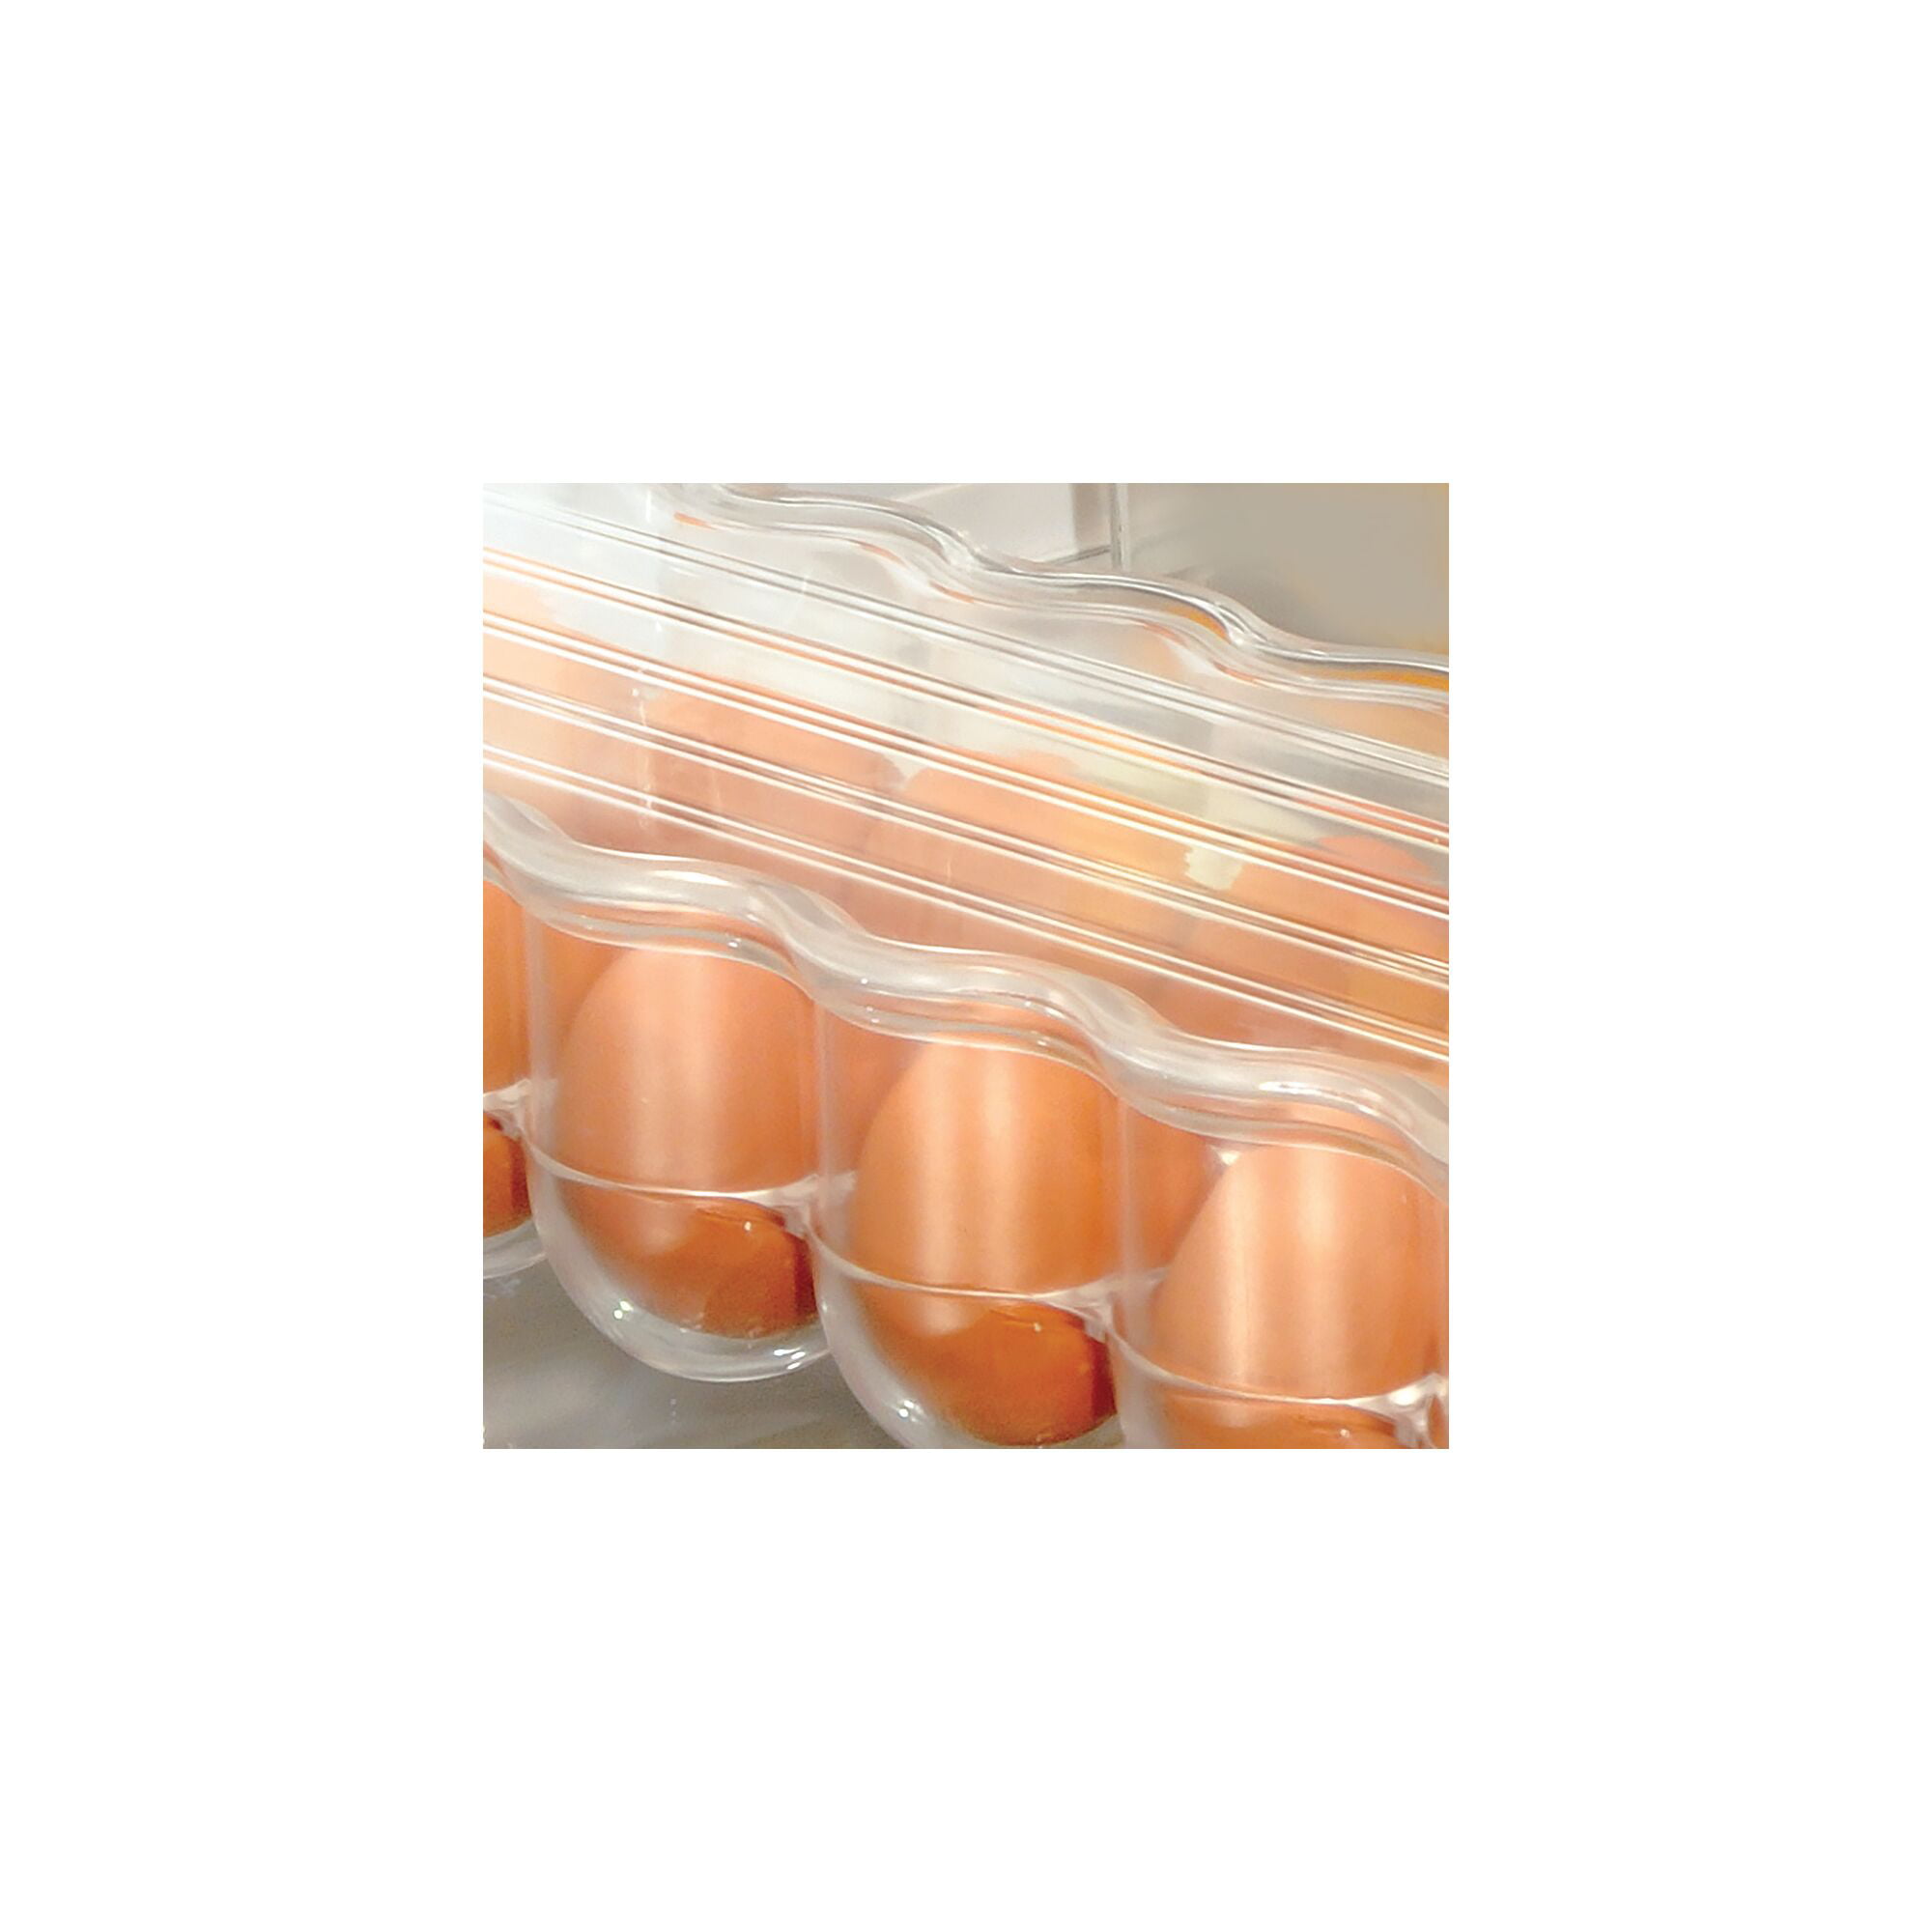 Dozen-Section Carrier Bin with Lid and Handle Clear Storage Container and Organizer for Refrigerator Holds 12 Eggs mDesign Stackable Plastic Covered Egg Tray Holder